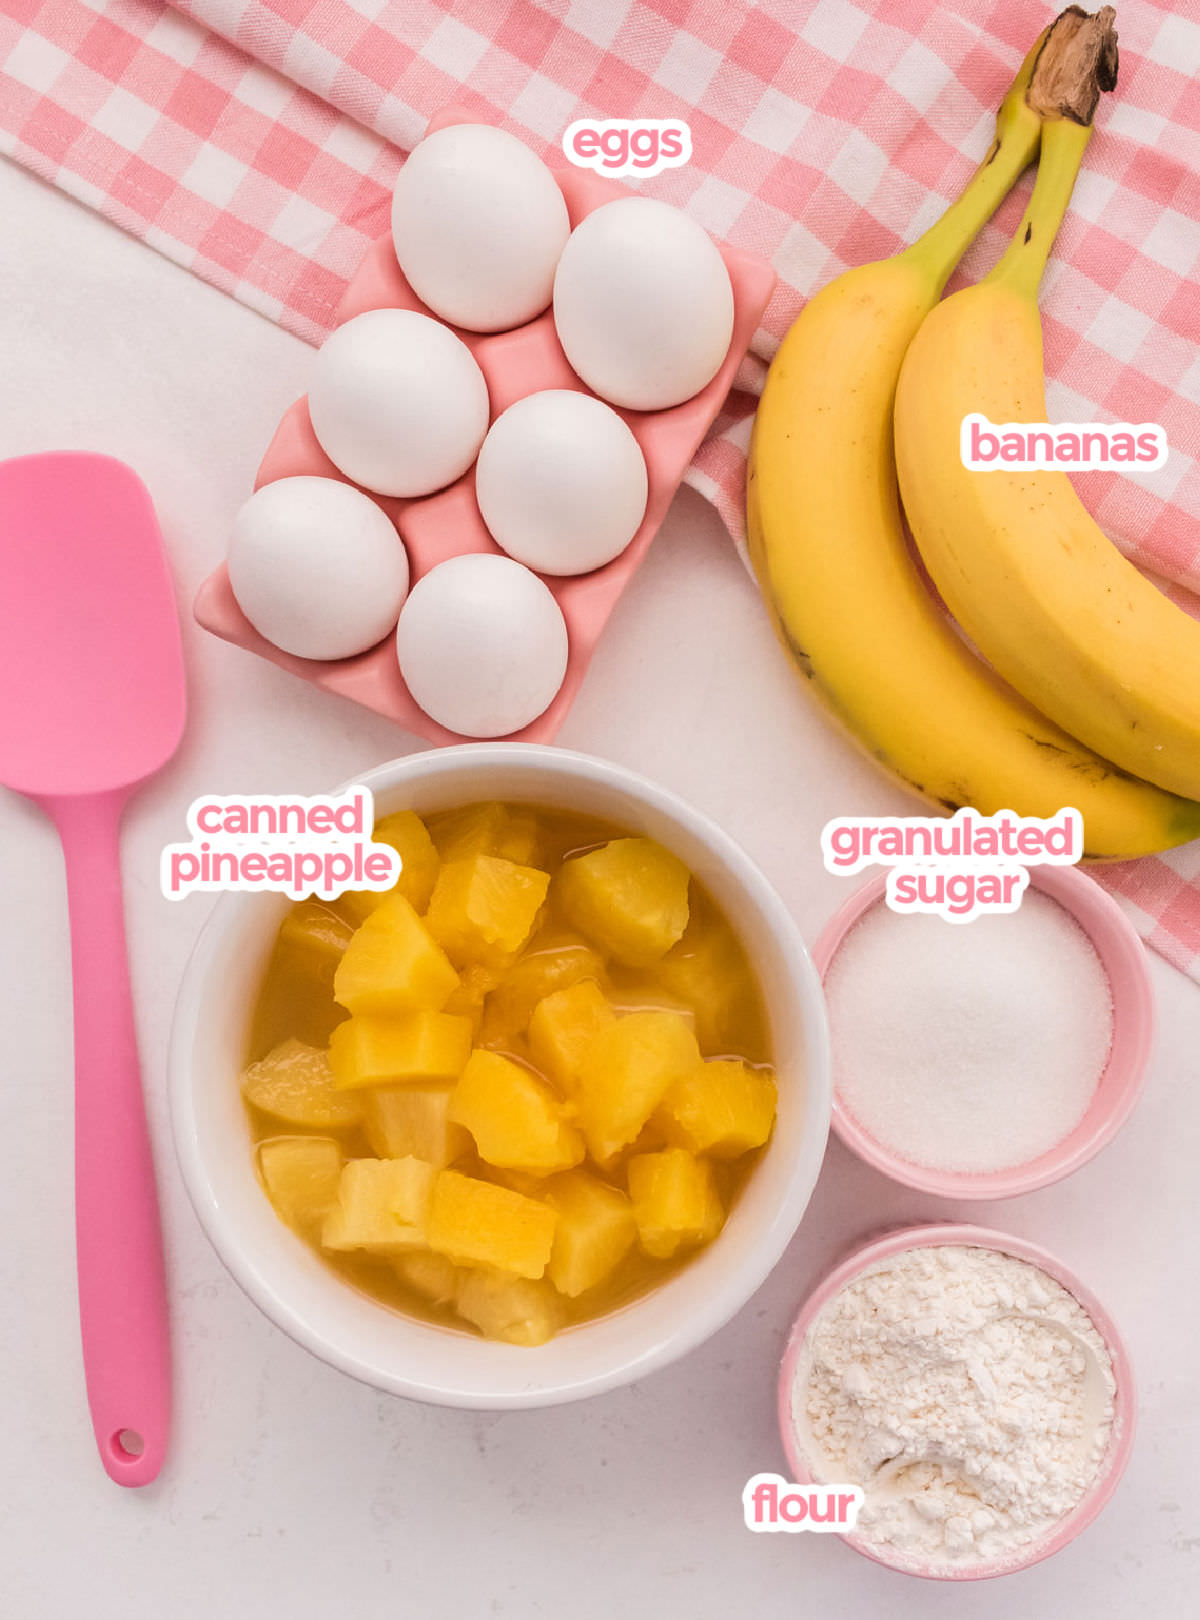 All the ingredients needed to make Pineapple Banana Fluff including Pineapple chunks, Bananas, eggs, granulated sugar and Flour.